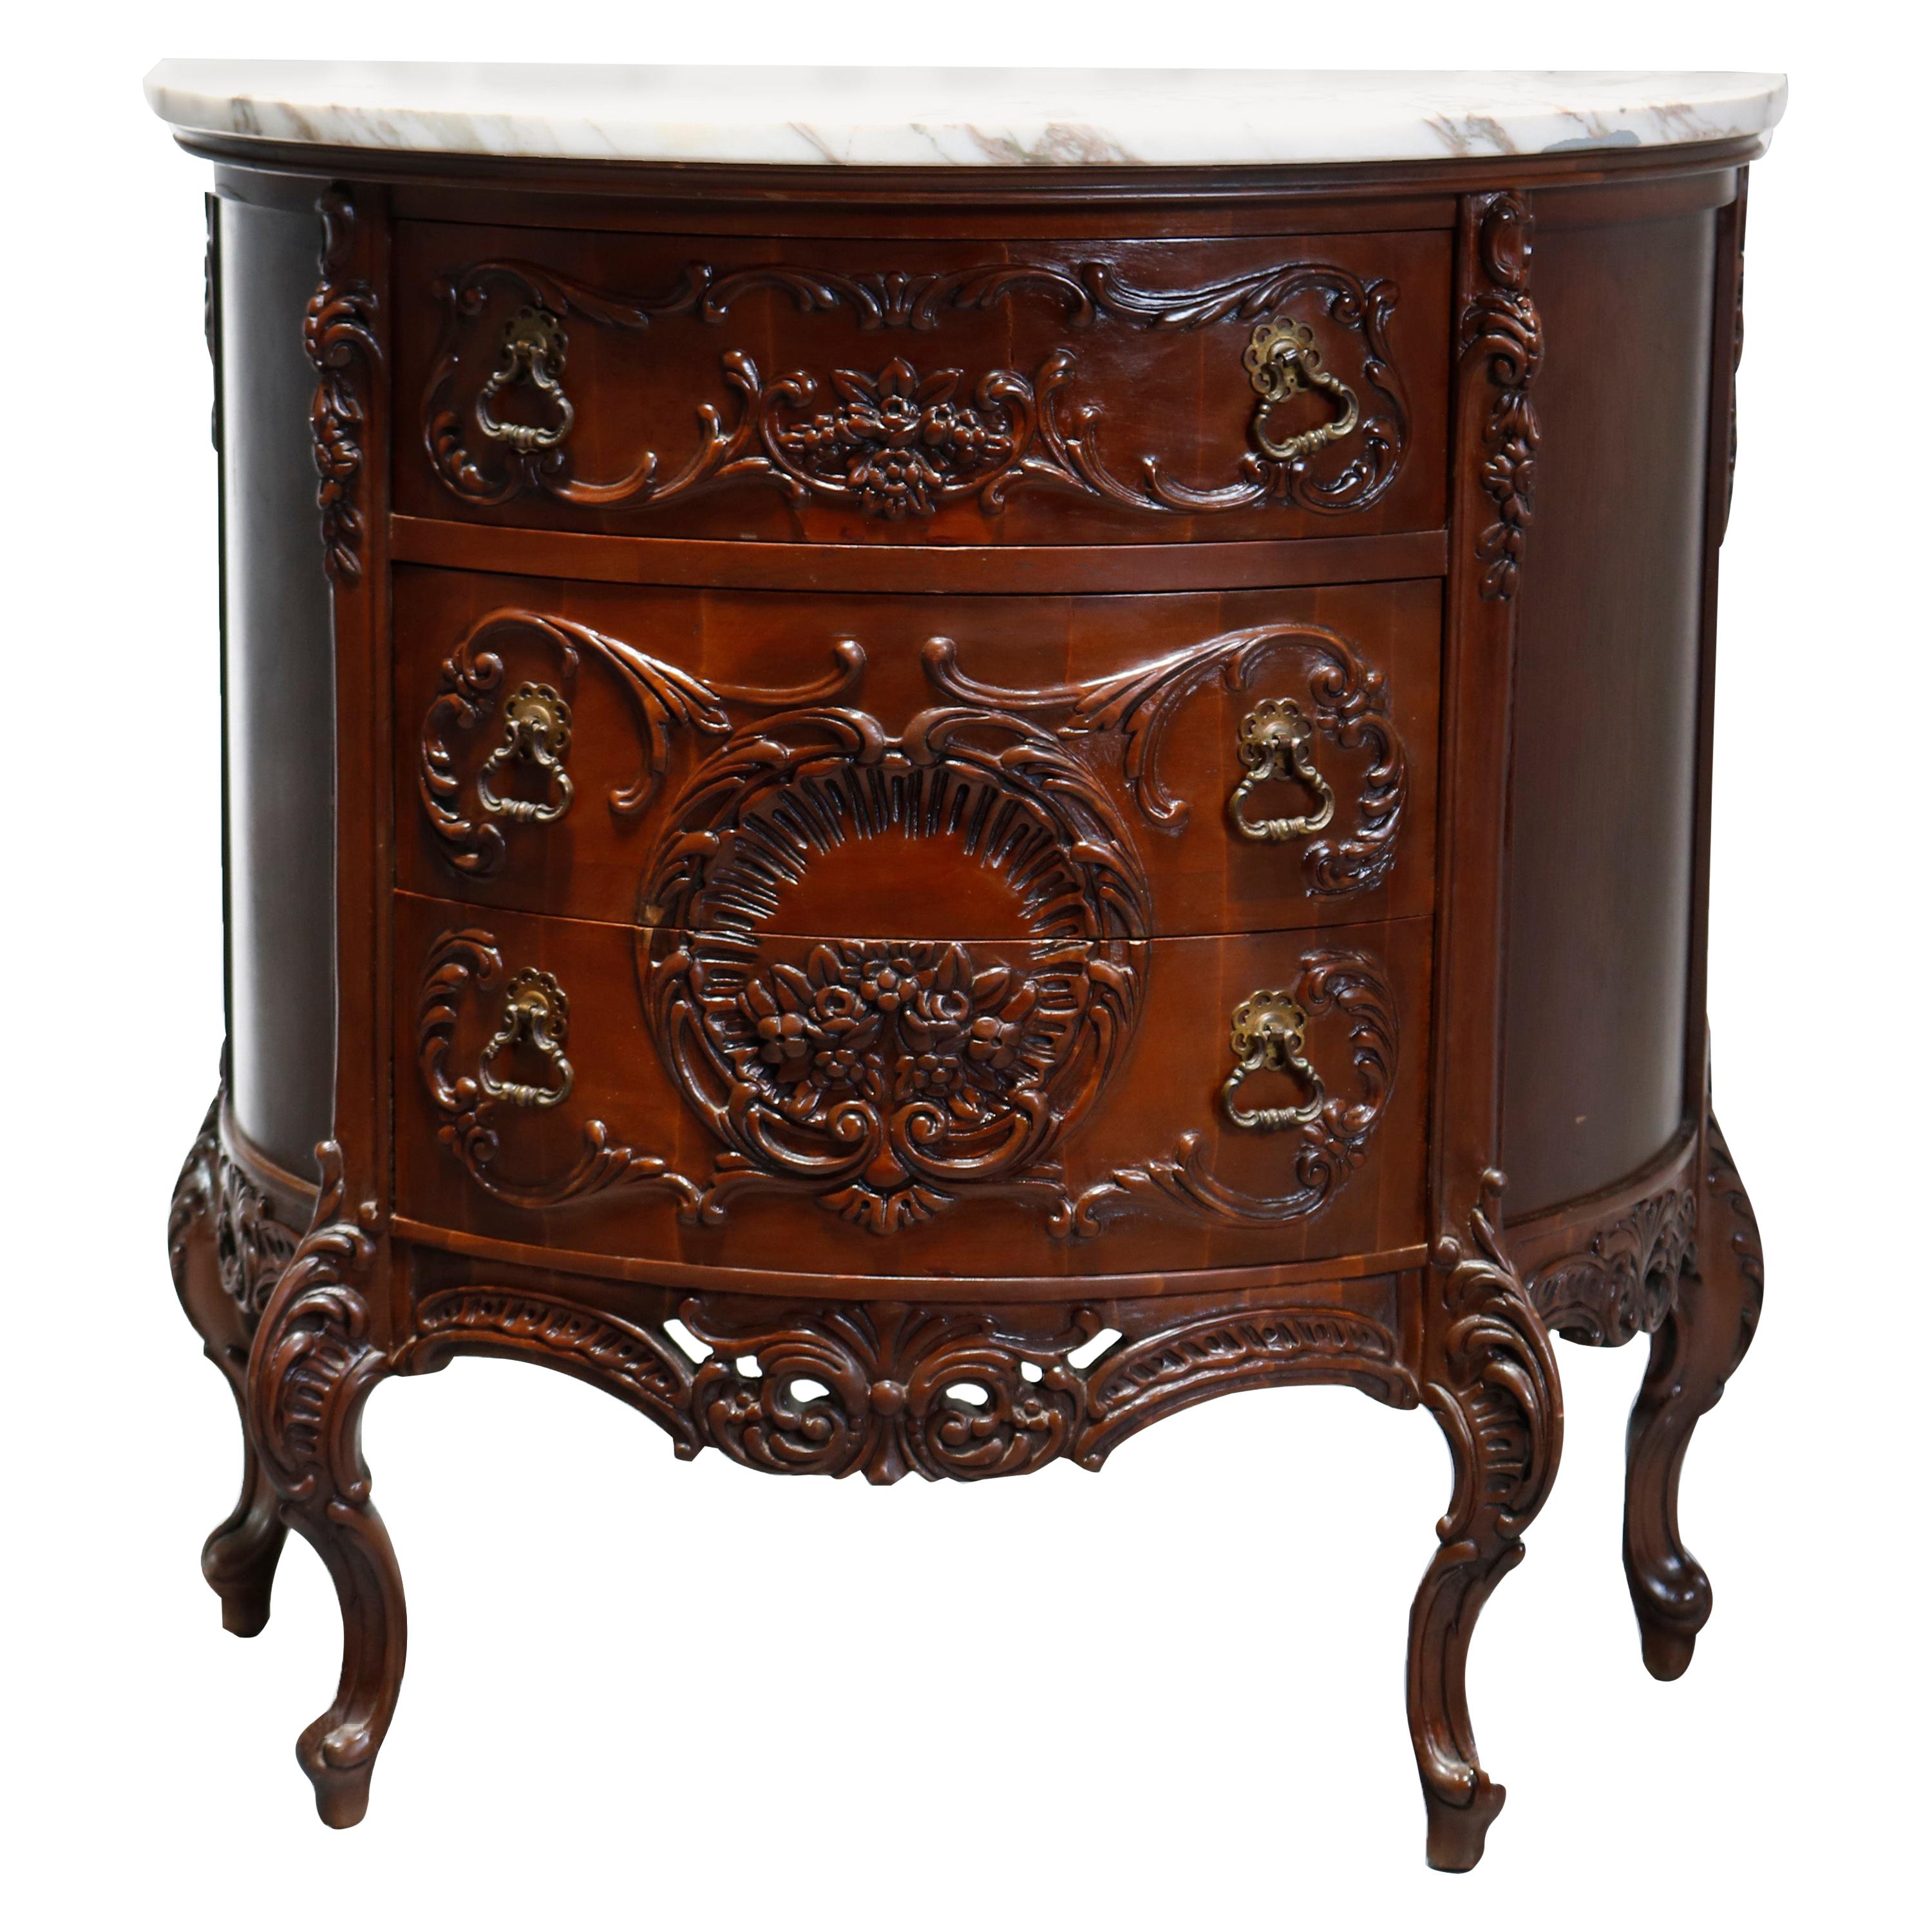 Antique French Carved Mahogany Marble Top Demilune Commode, 20th Century